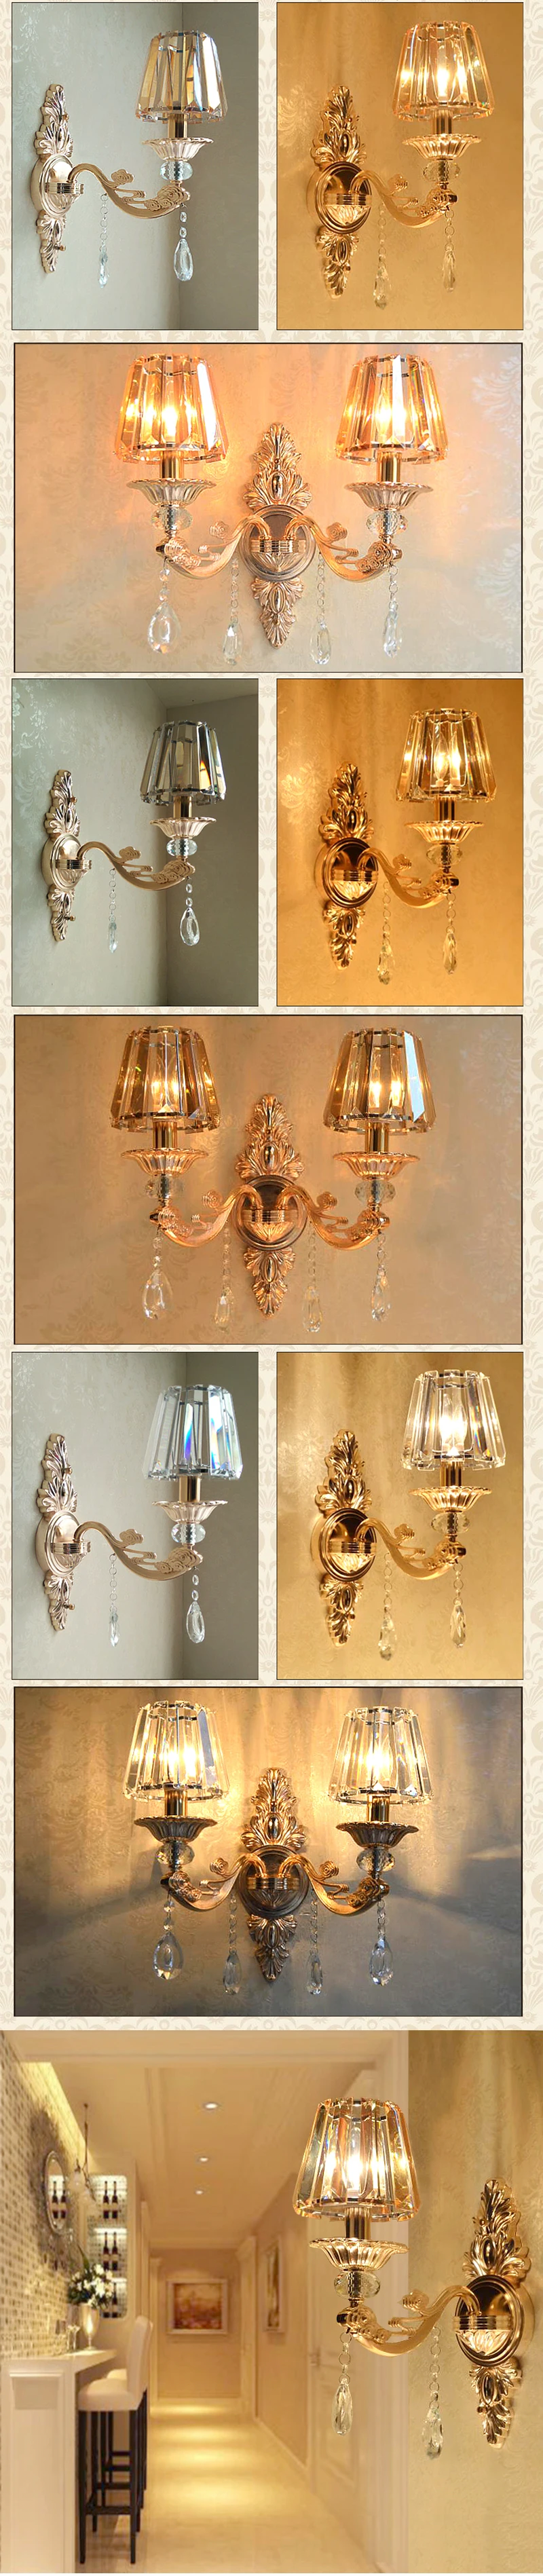 home hotel bedside luxury colored champagne amber cognac 2 lights Crystal Wall Sconce lights chandelier lamp